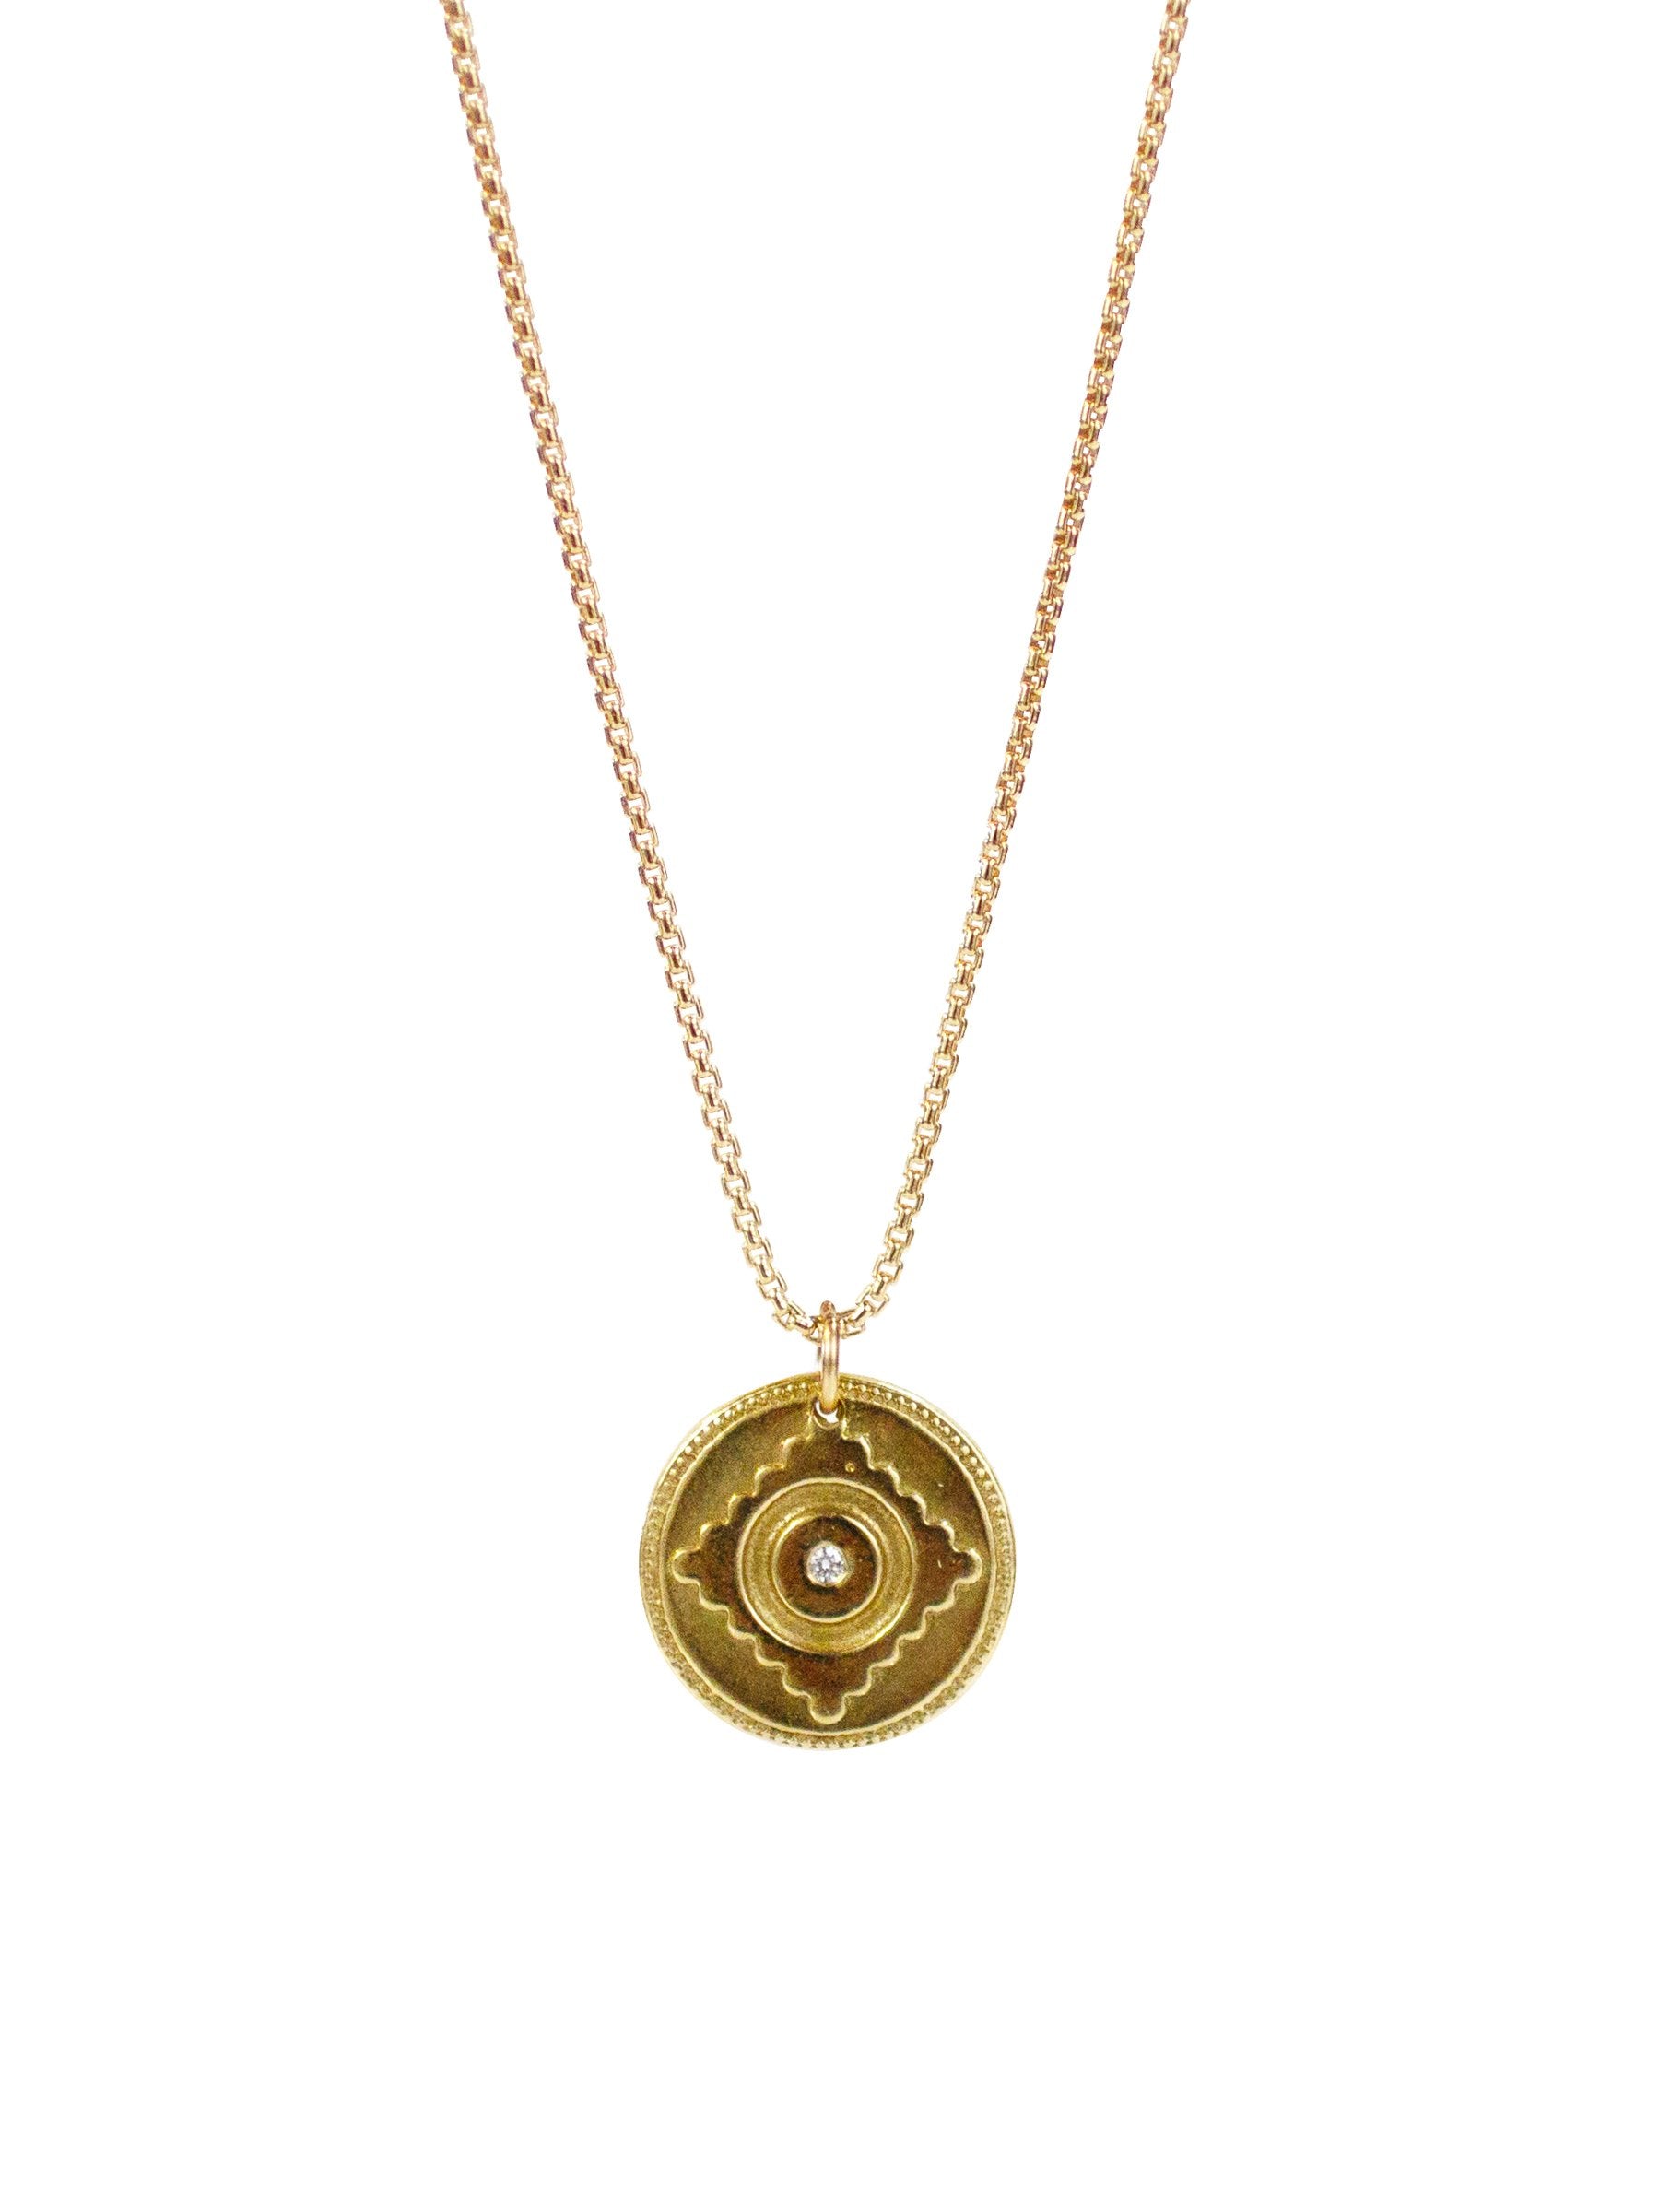 Leela Necklace, divine grace, yellow bronze or sterling silver "Leela" pendant with 14k gold filled or sterling silver rolled box chain.